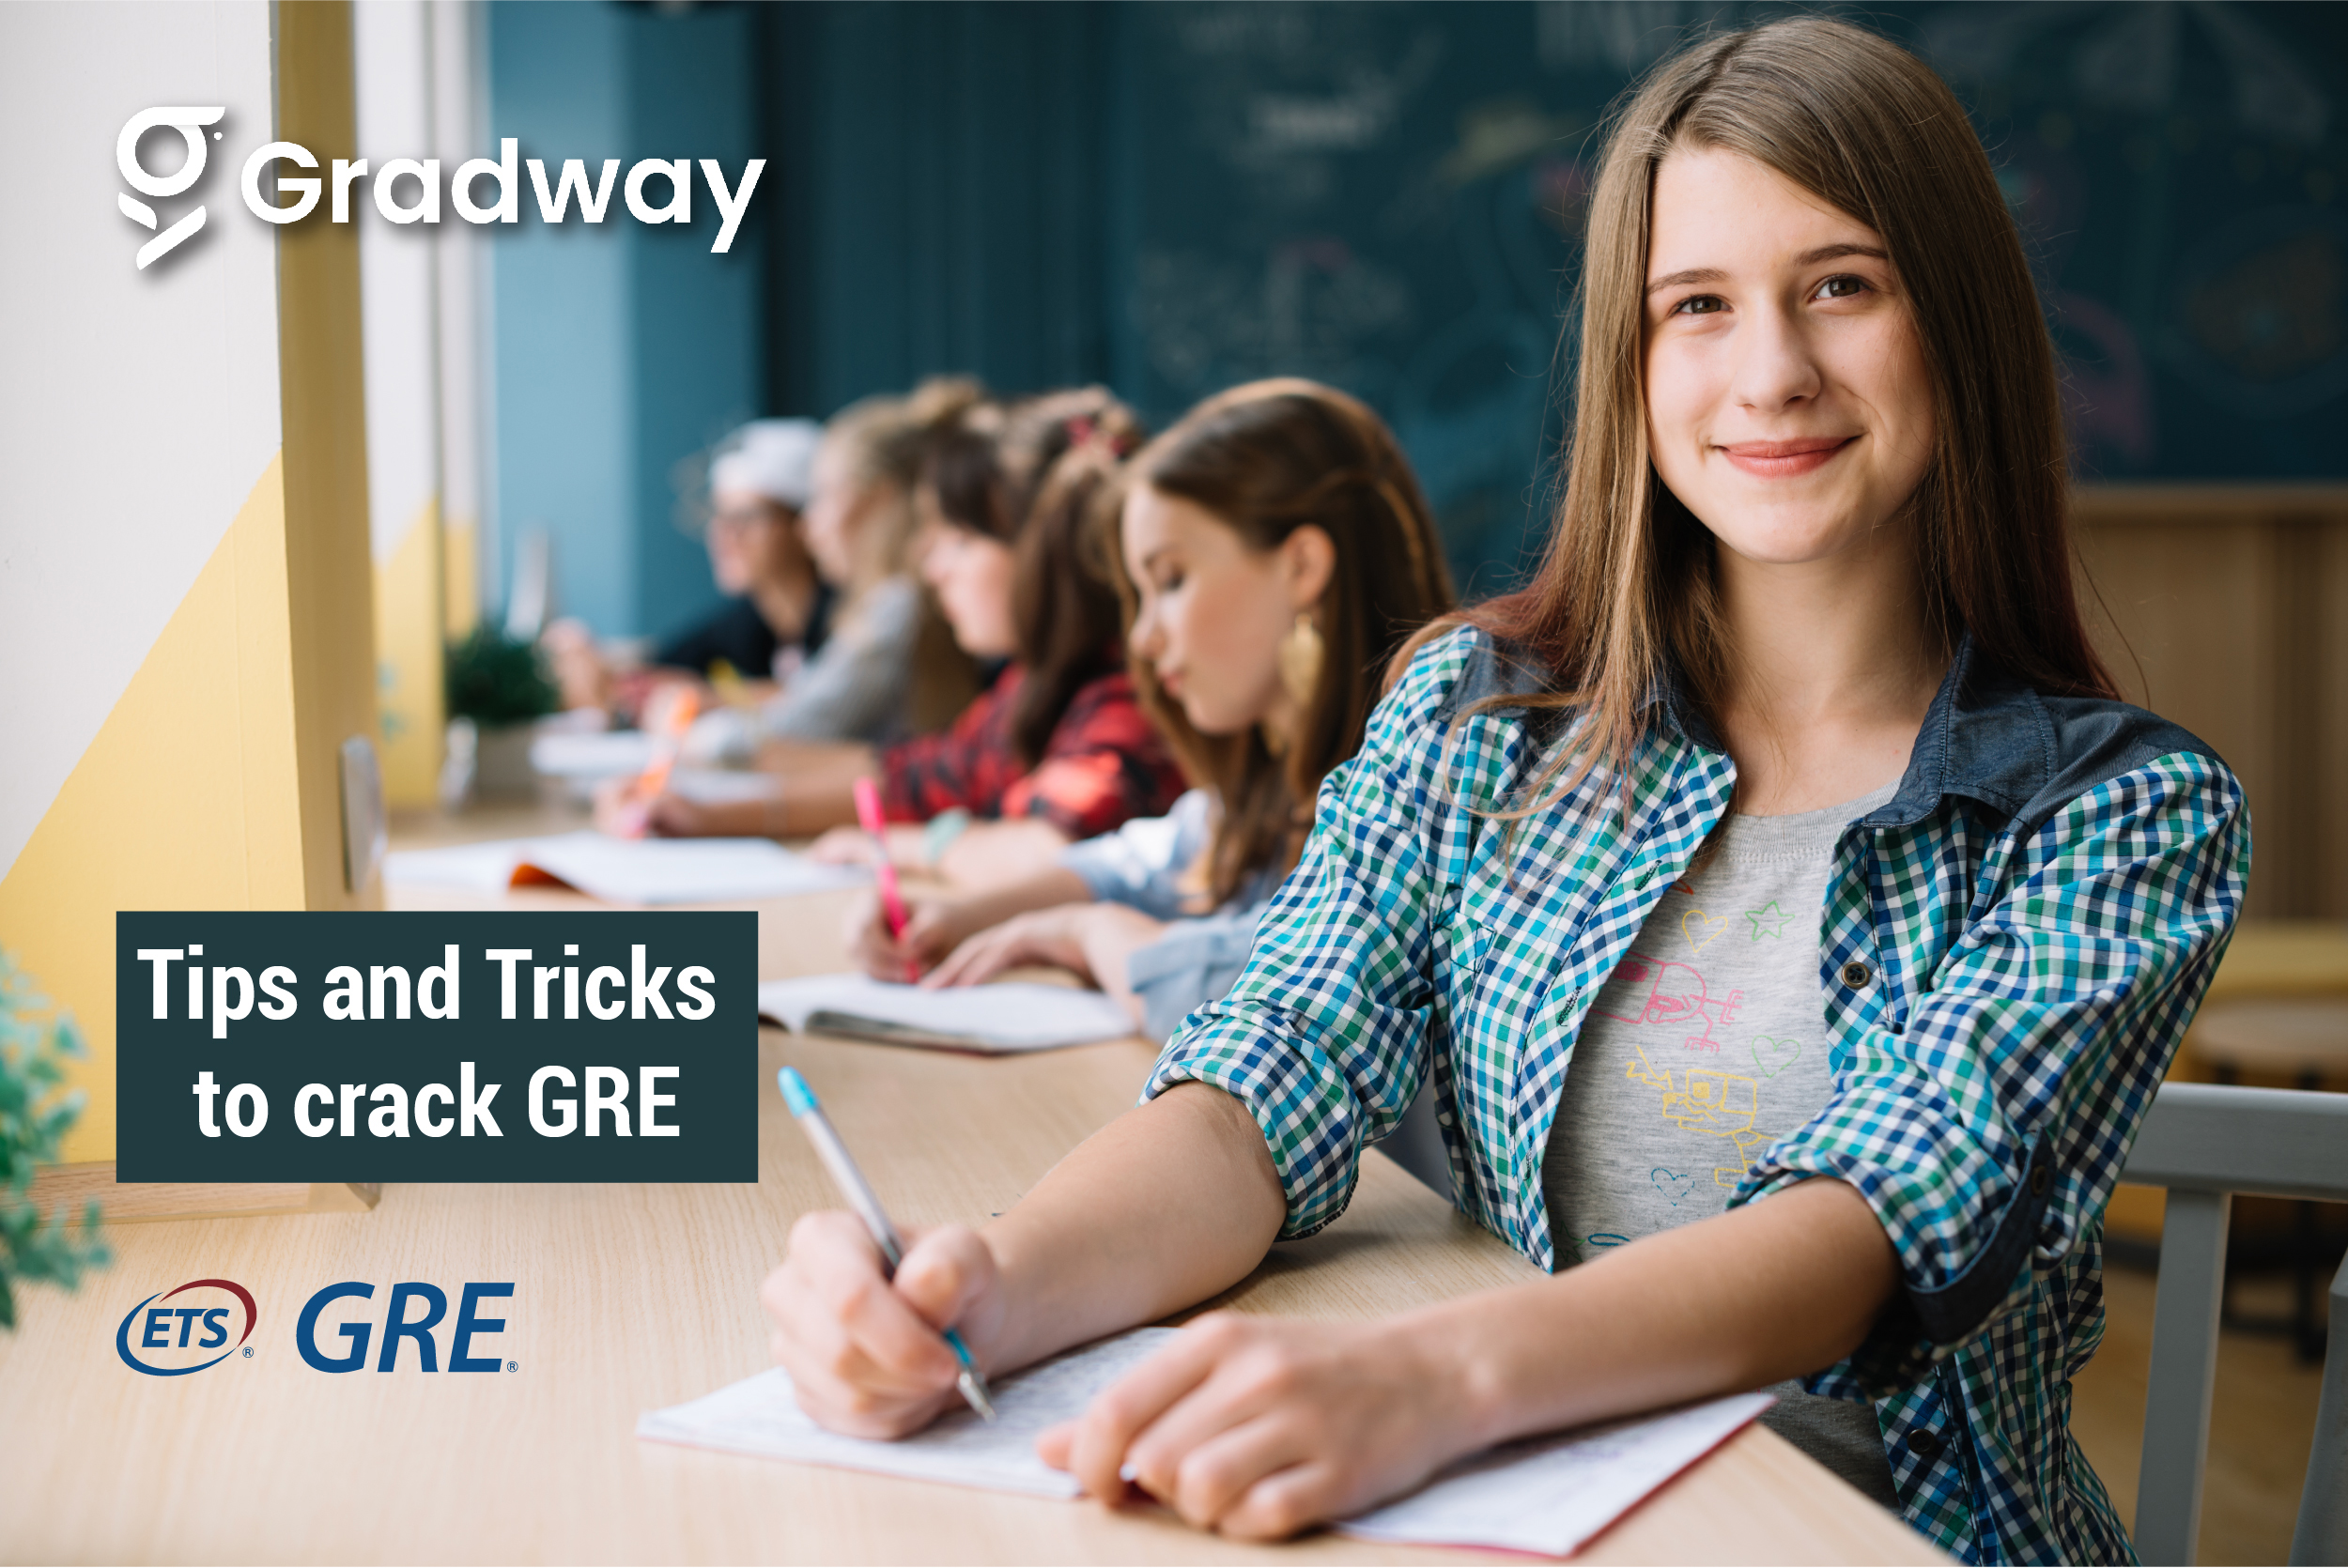 Tips and tricks to crack GRE | Gradway